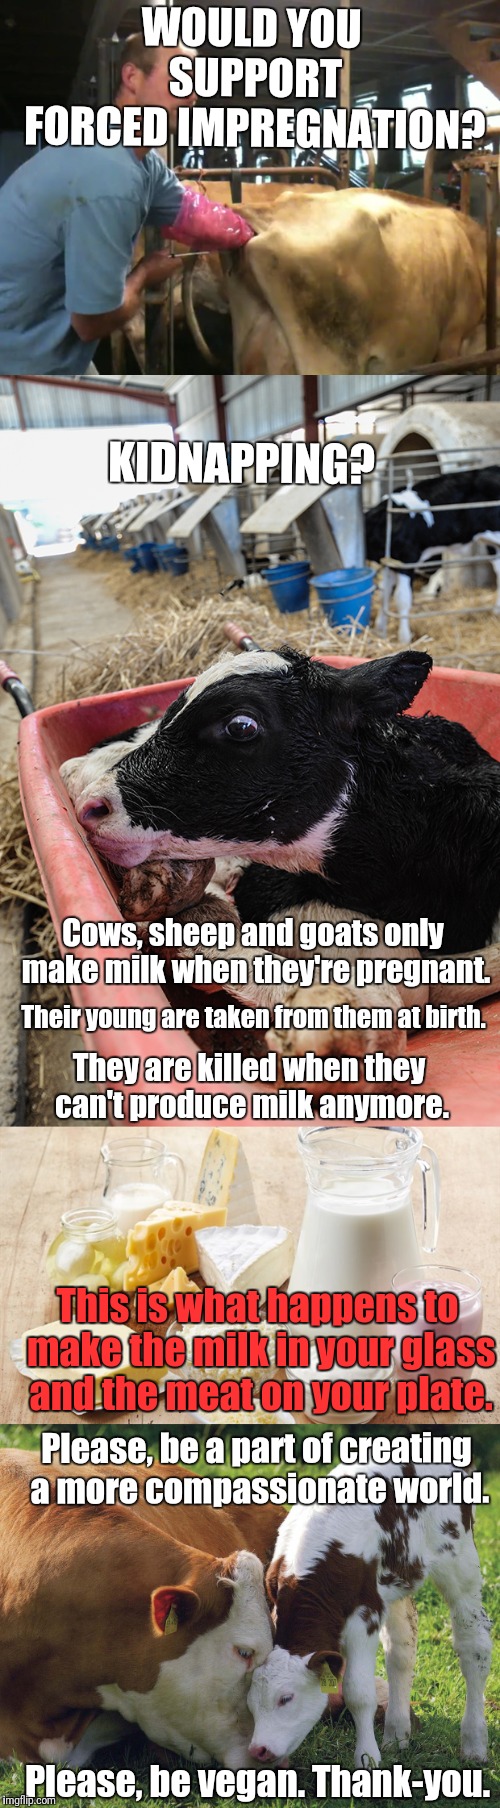 If it's not good enough for your eyes, is it good enough for your stomach? | WOULD YOU SUPPORT FORCED IMPREGNATION? KIDNAPPING? Cows, sheep and goats only make milk when they're pregnant. Their young are taken from them at birth. They are killed when they can't produce milk anymore. This is what happens to make the milk in your glass and the meat on your plate. Please, be a part of creating a more compassionate world. Please, be vegan.
Thank-you. | image tagged in dairy,milk,milkshake,cheese,cheeseburger,meat | made w/ Imgflip meme maker